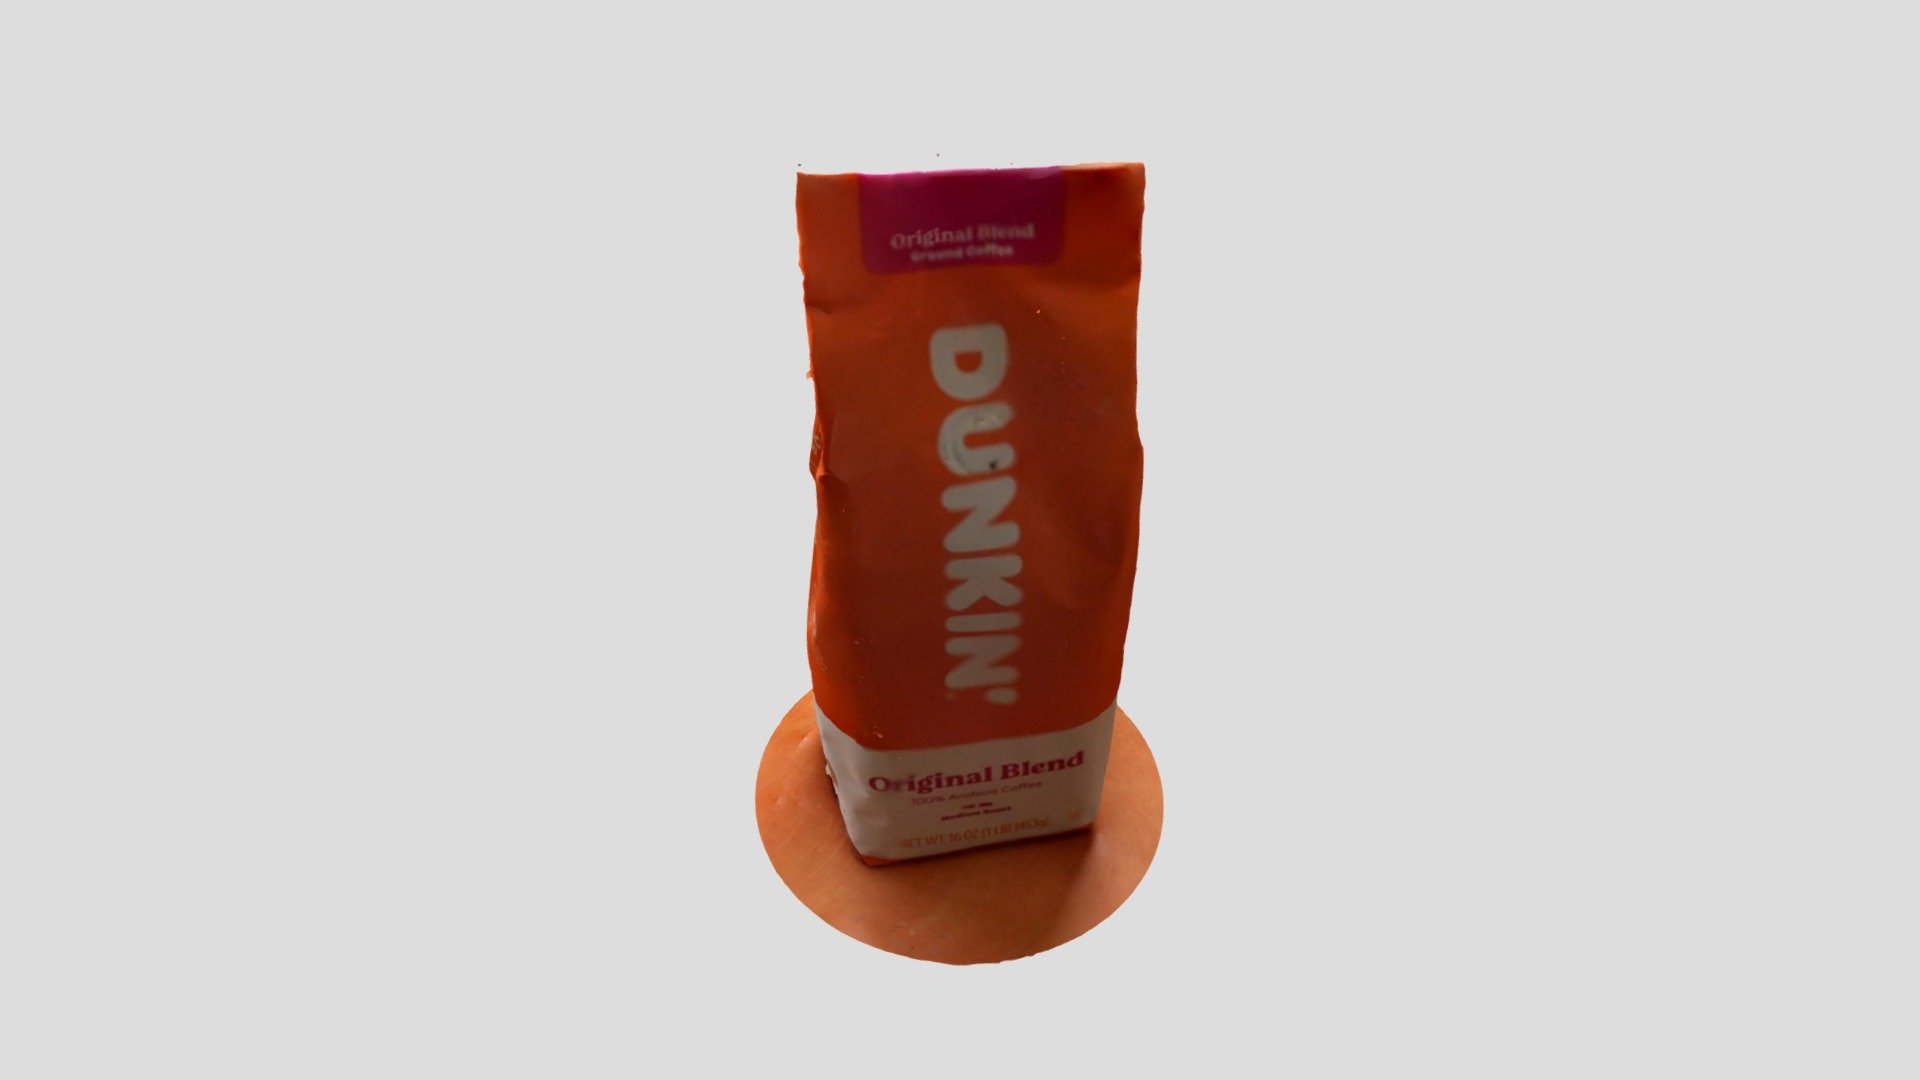 a bag of Dunkin Donuts coffe